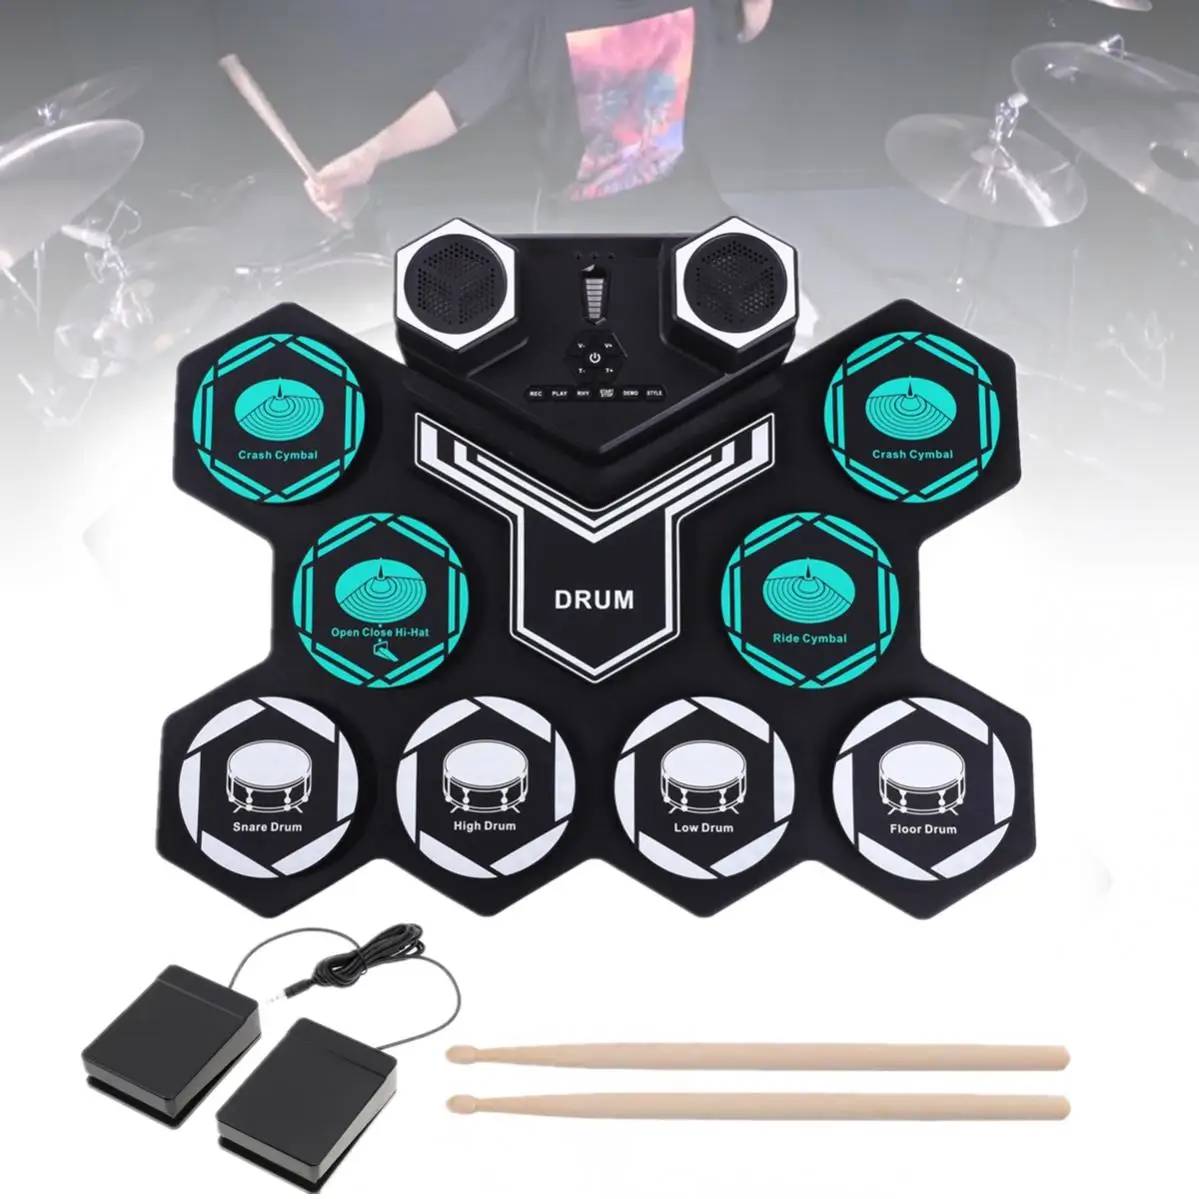 Roll Up Electronic Drum Set 8 Silicon Pads Built-in Speakers MIDI Support Bluetooth-compatible enlarge